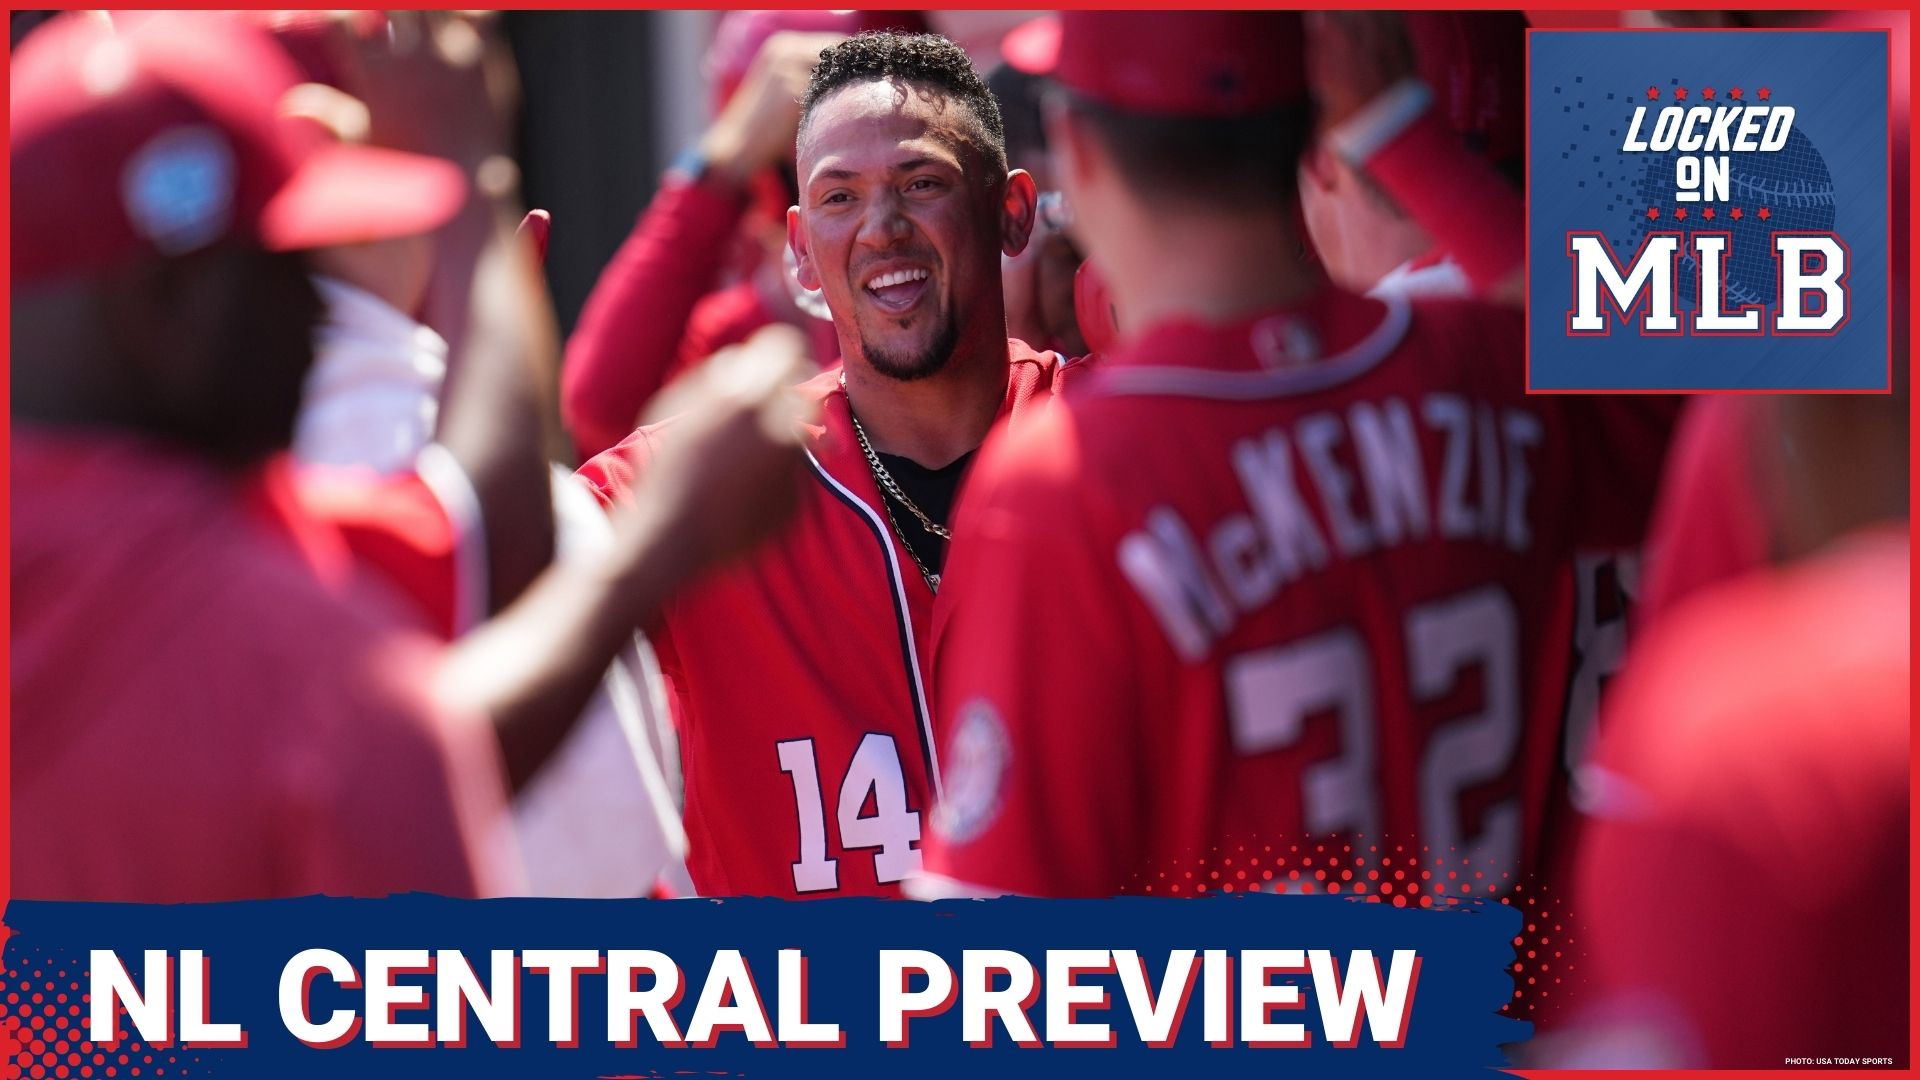 A special edition of Lock On MLB previewing the NL Central division for the upcoming 2023 season. The teams to watch and who could win it all.